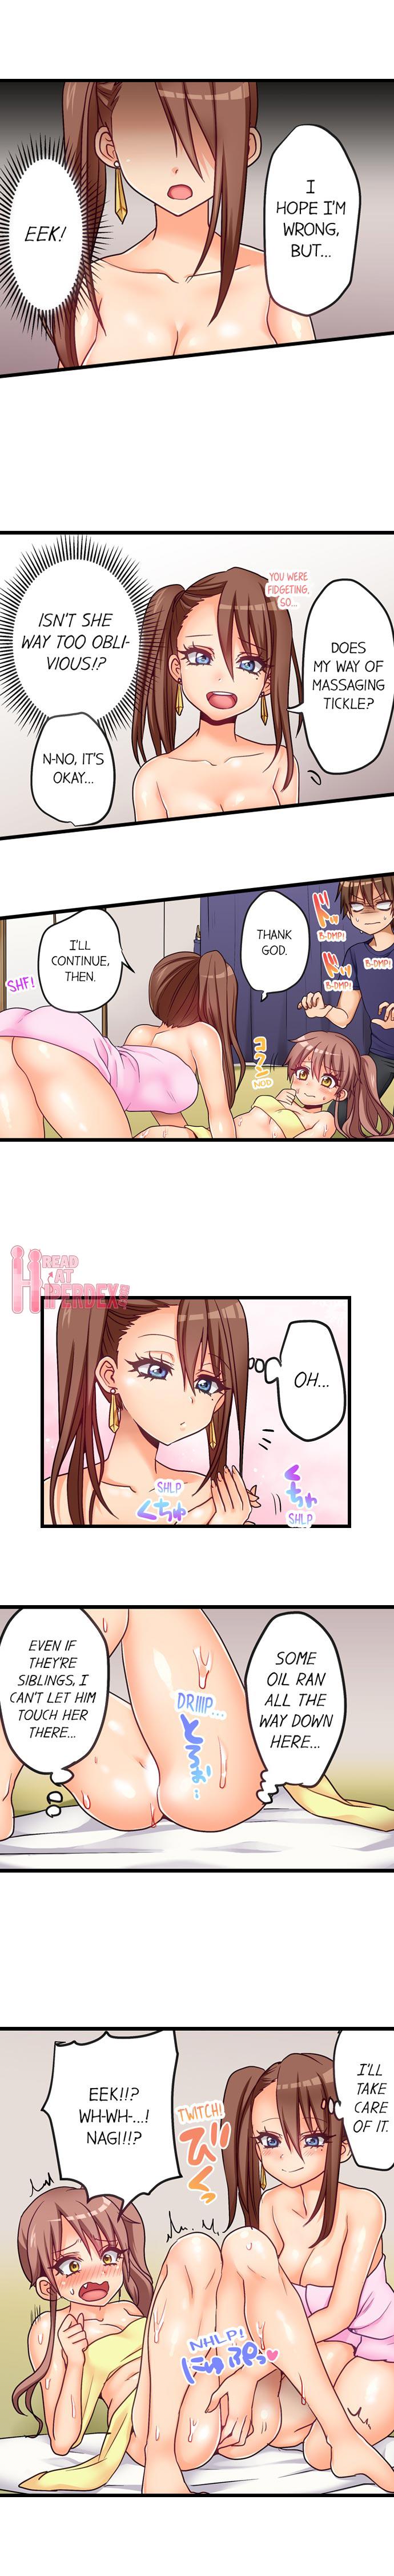 Pack Porori] My First Time is with.... My Little Sister?! - Original Hard Cock - Page 5